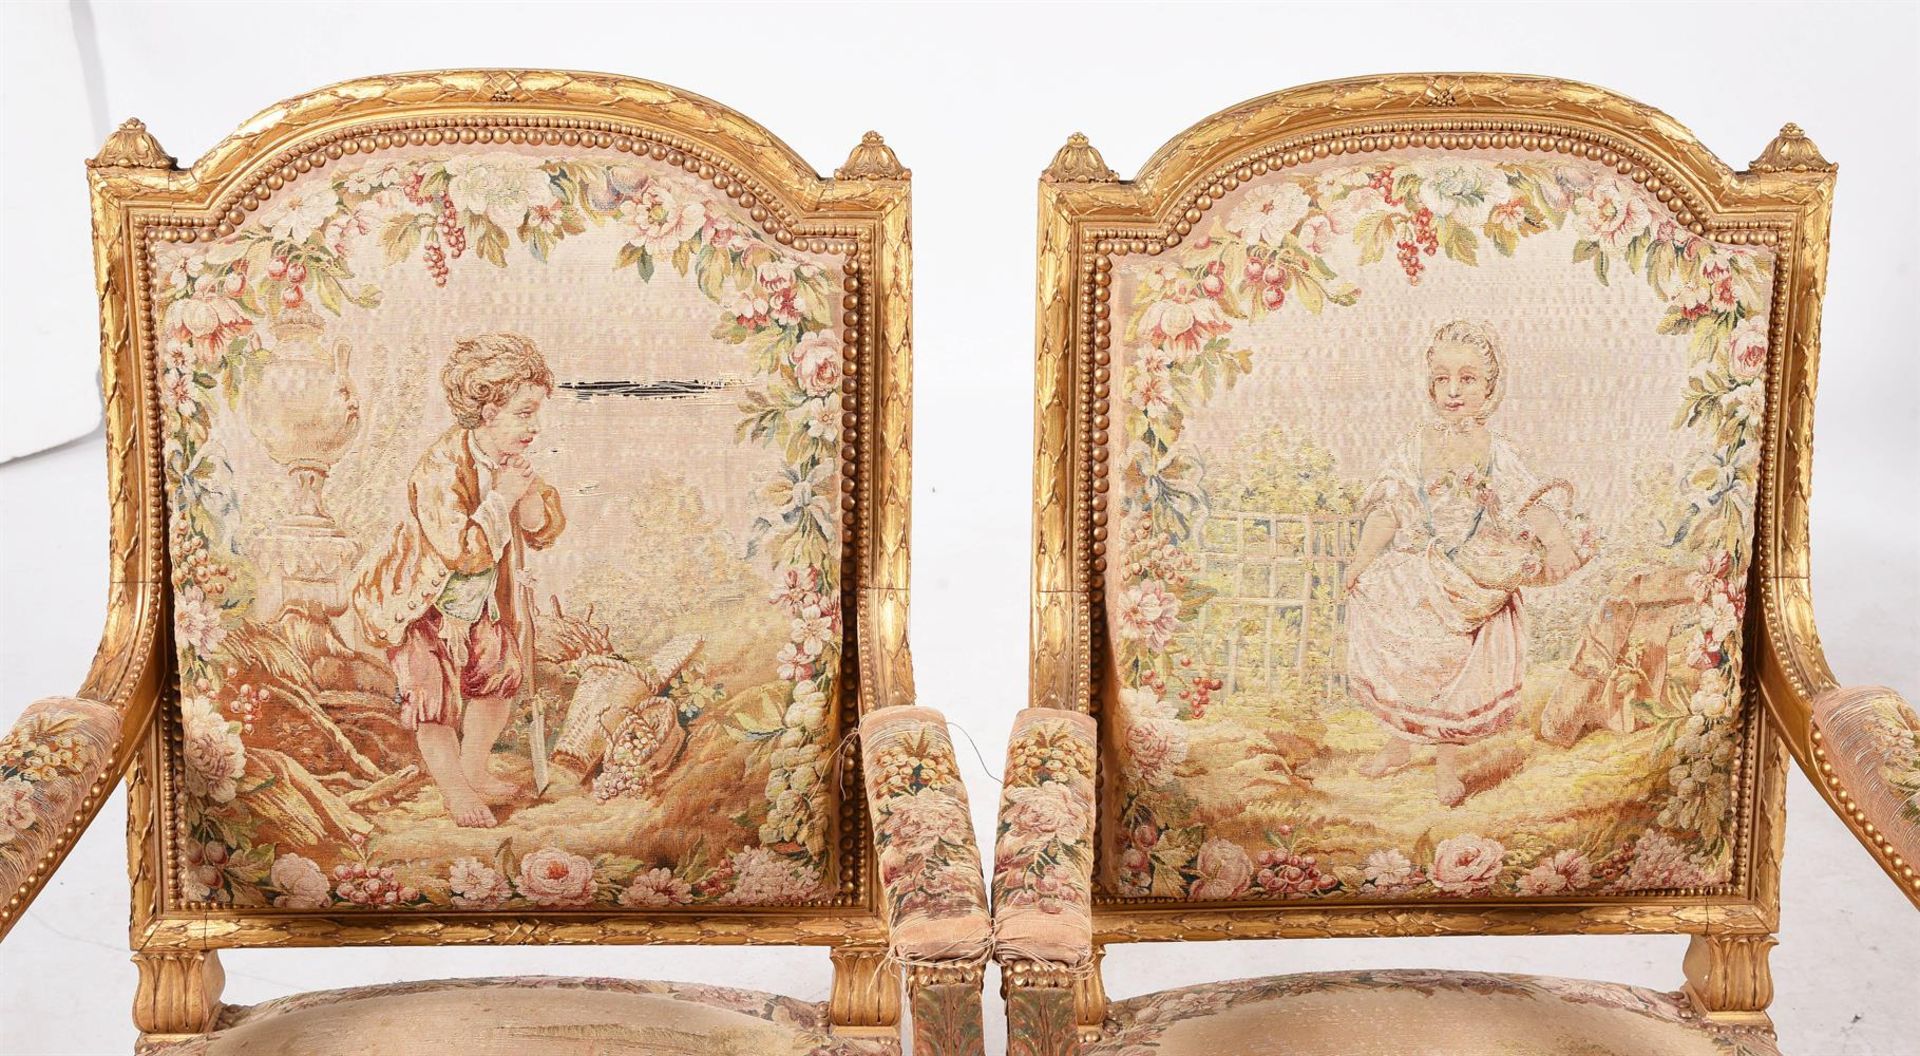 A FRENCH TRANSITIONAL AUBUSSON UPHOLSTERED GILTWOOD SALON SUITE, IN LOUIS XVI STYLE - Image 2 of 10